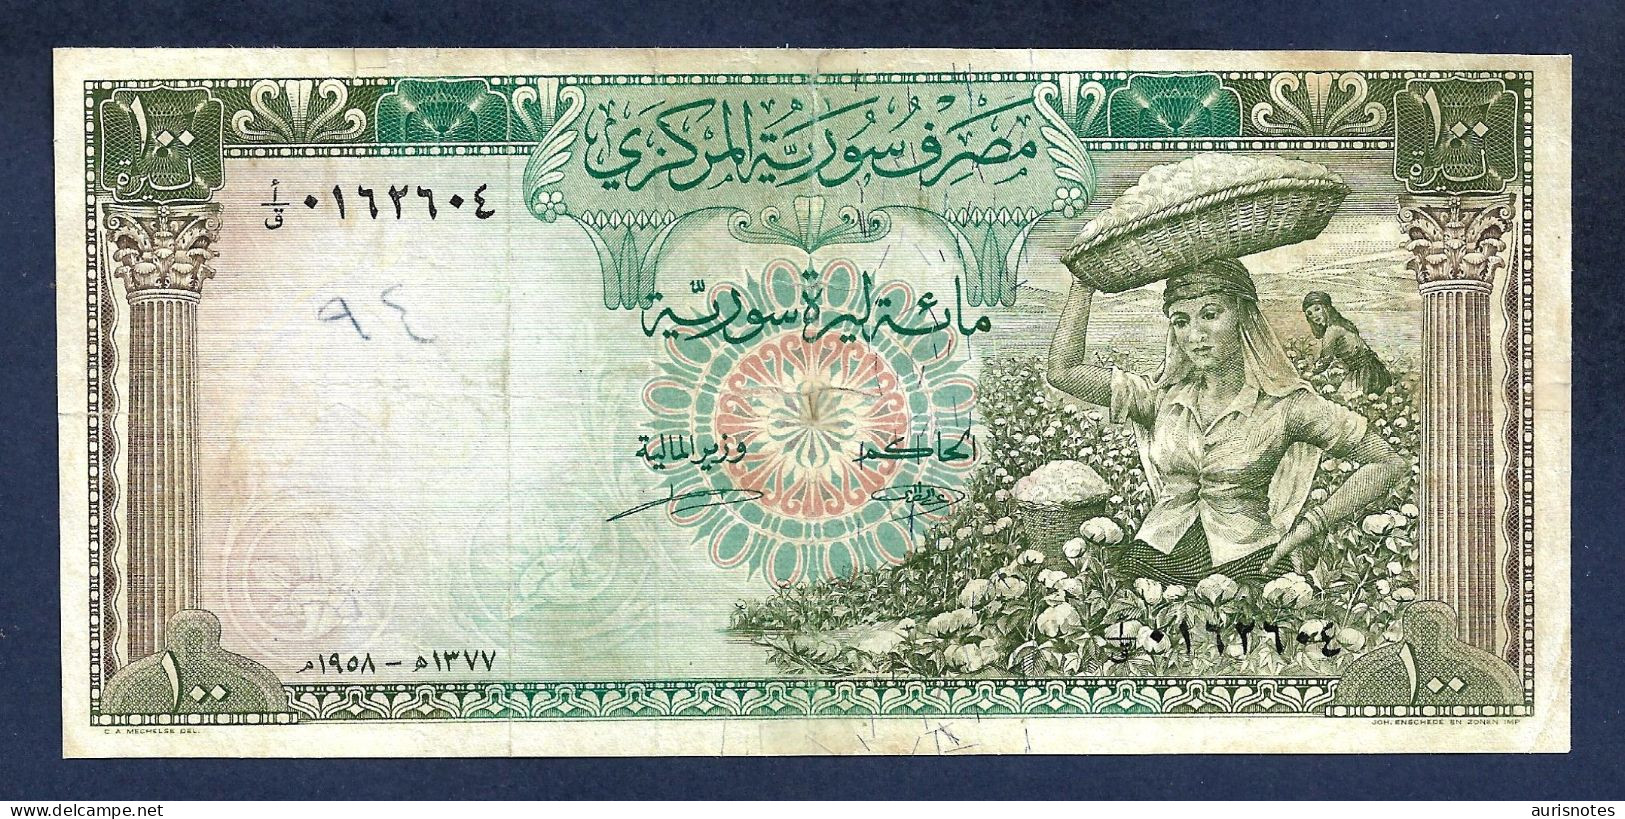 Syria 100 Pounds 1958 P91a First Issue Scarce Fine/VF - Syrie